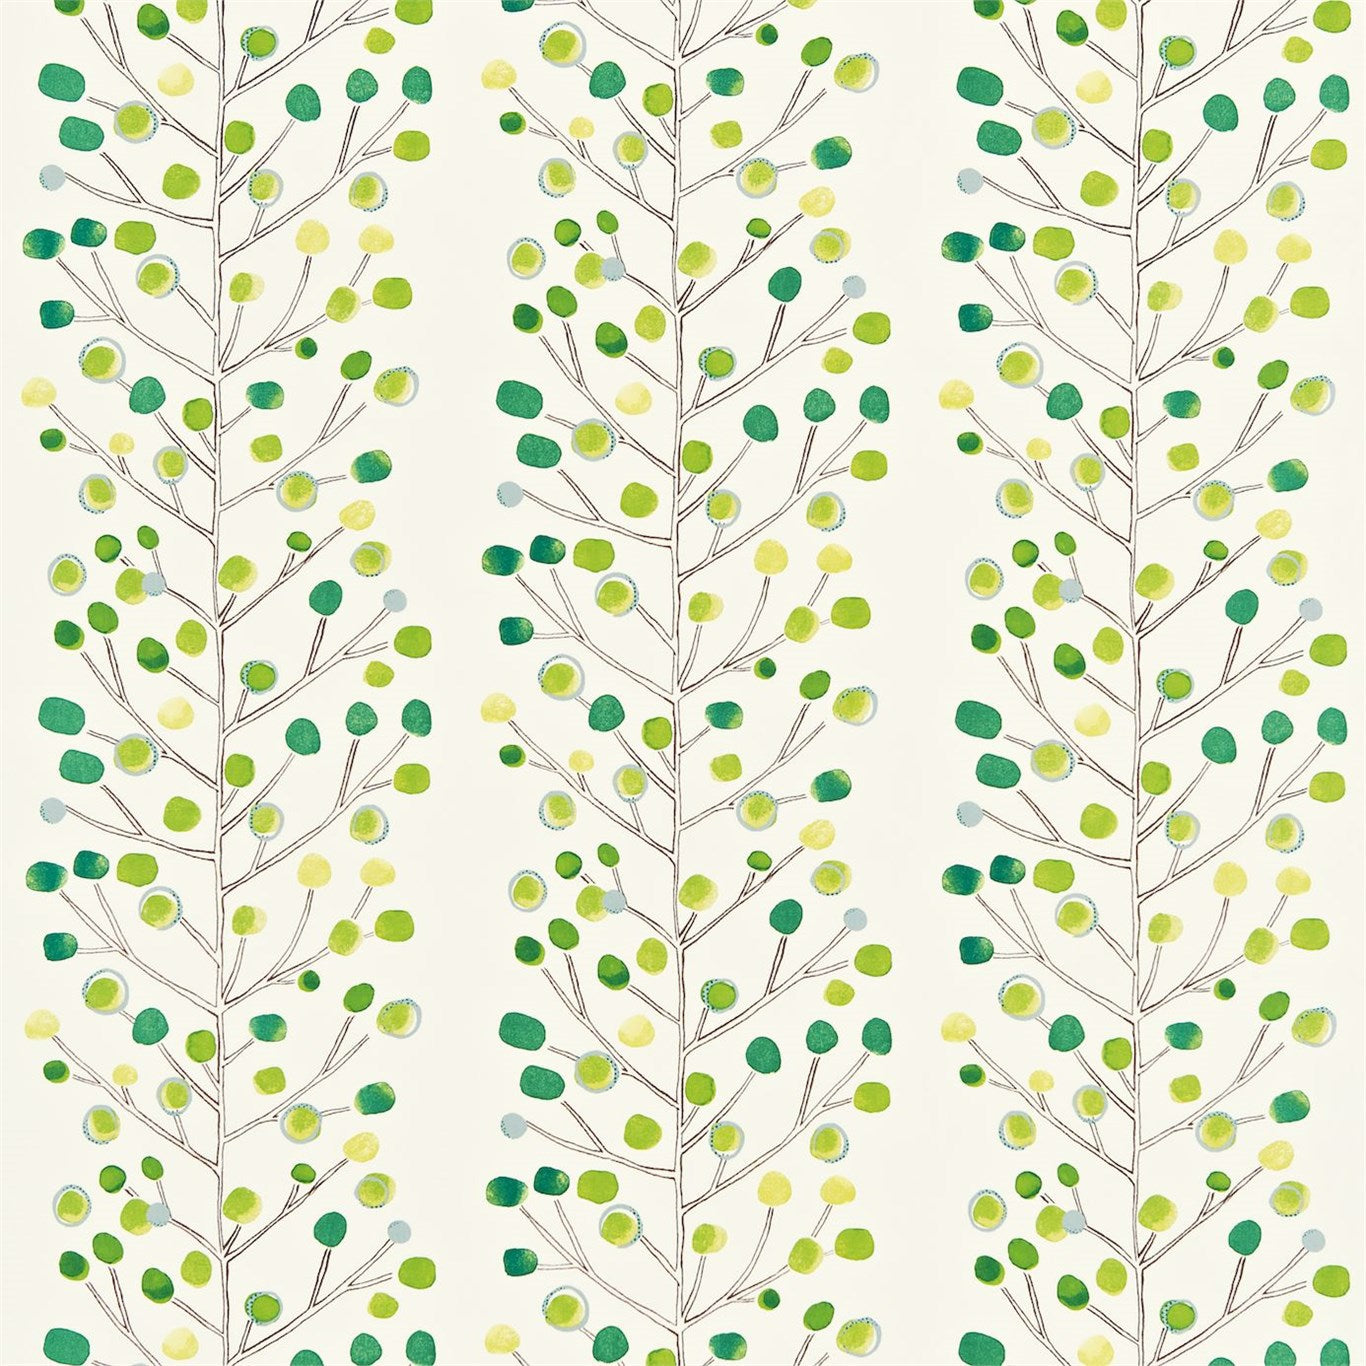 Berry Tree Fabric by Scion - NMEL120051 - Emerald Lime And Chalk